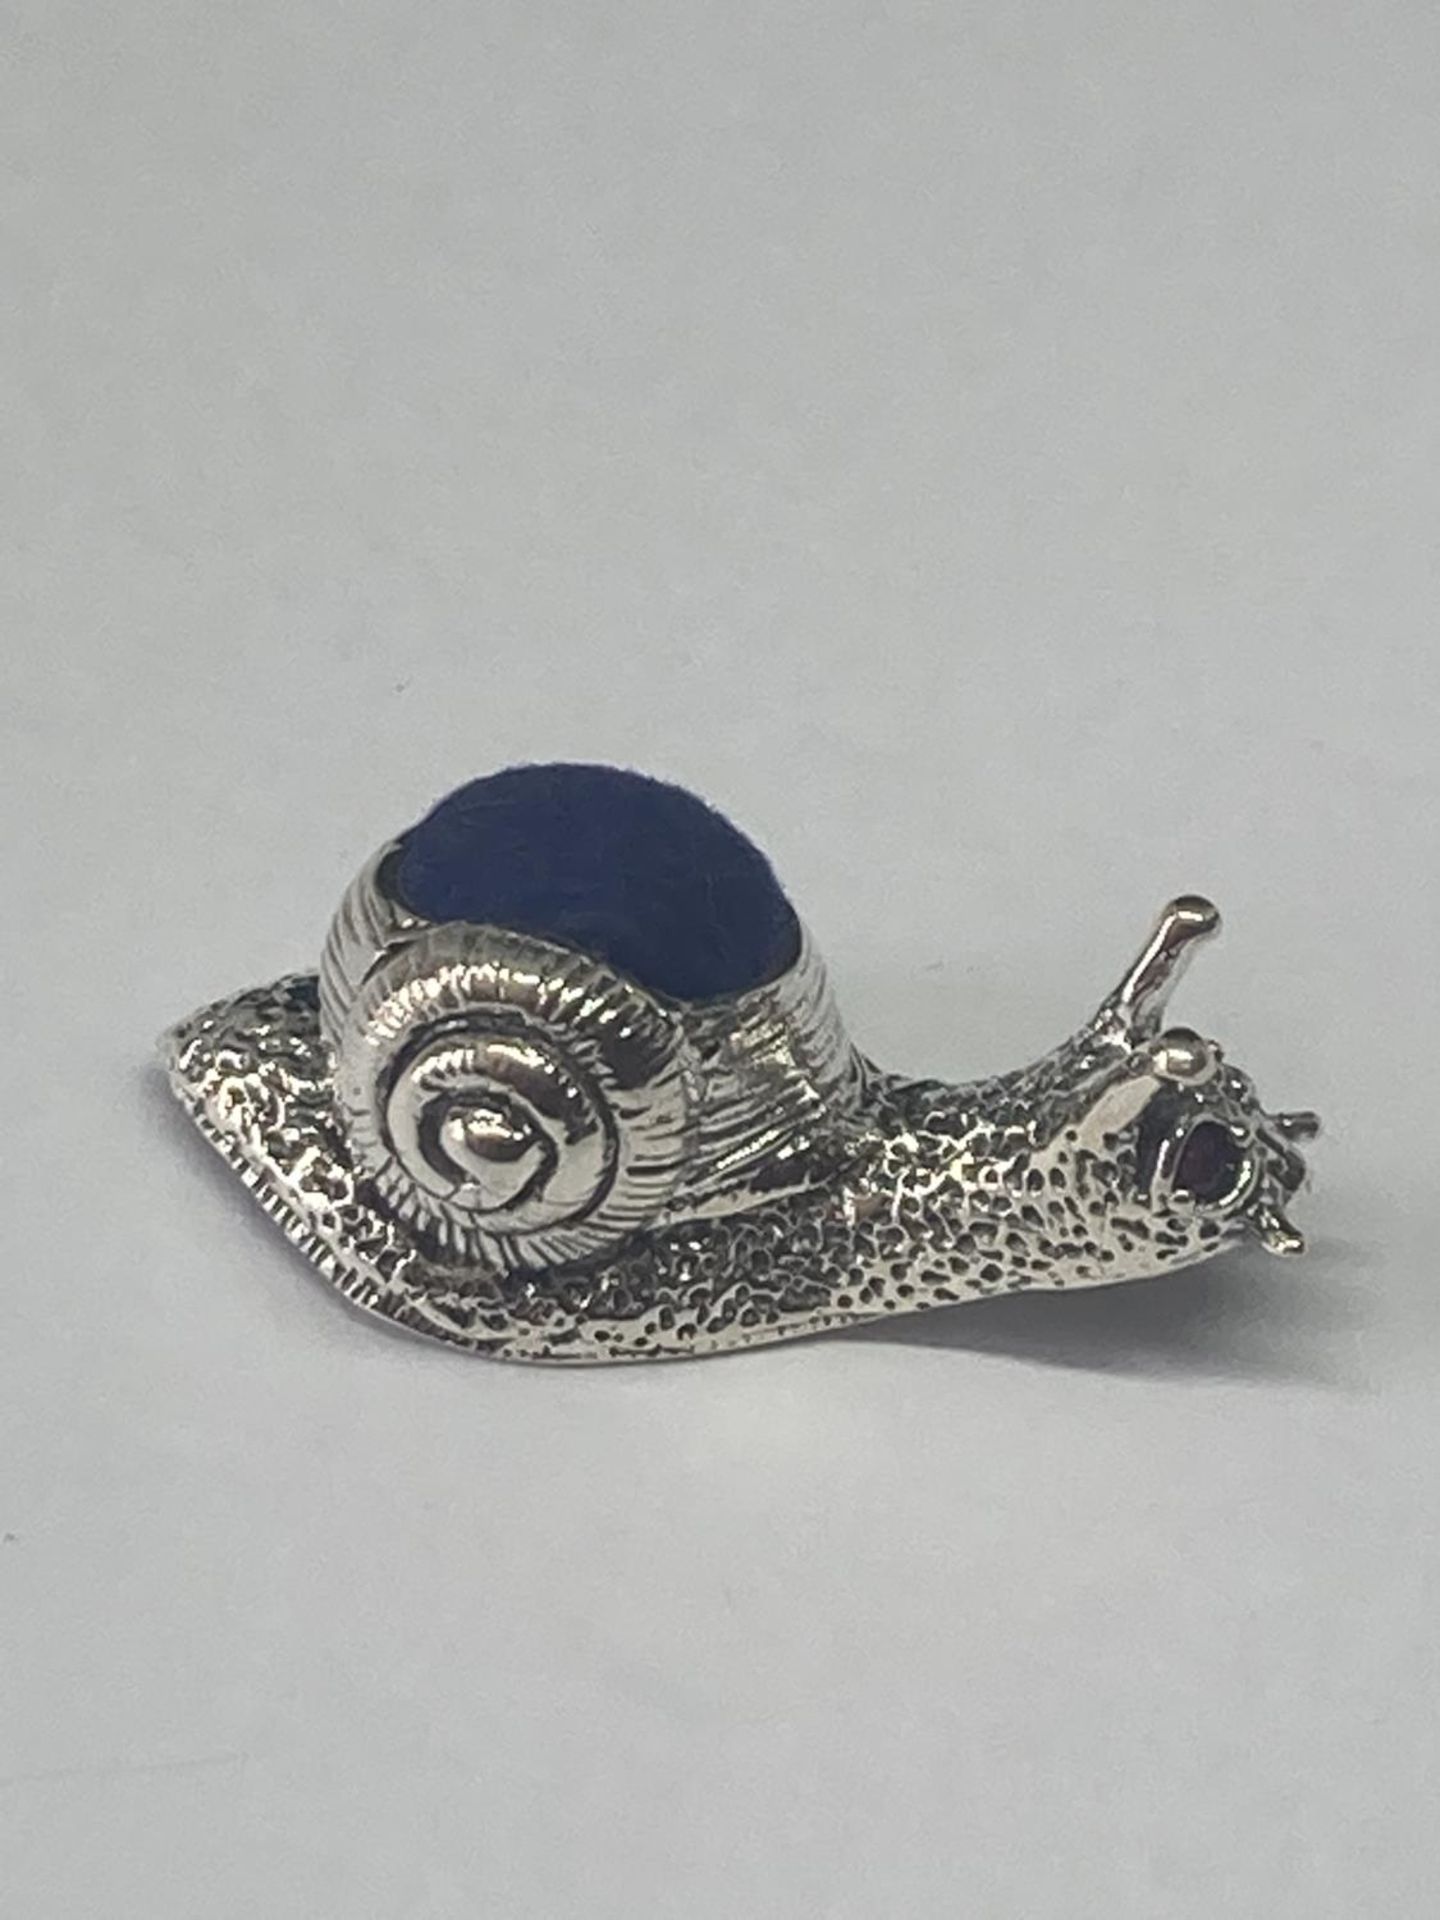 A MARKED SILVER PIN CUSHION IN THE FORM OF A SNAIL